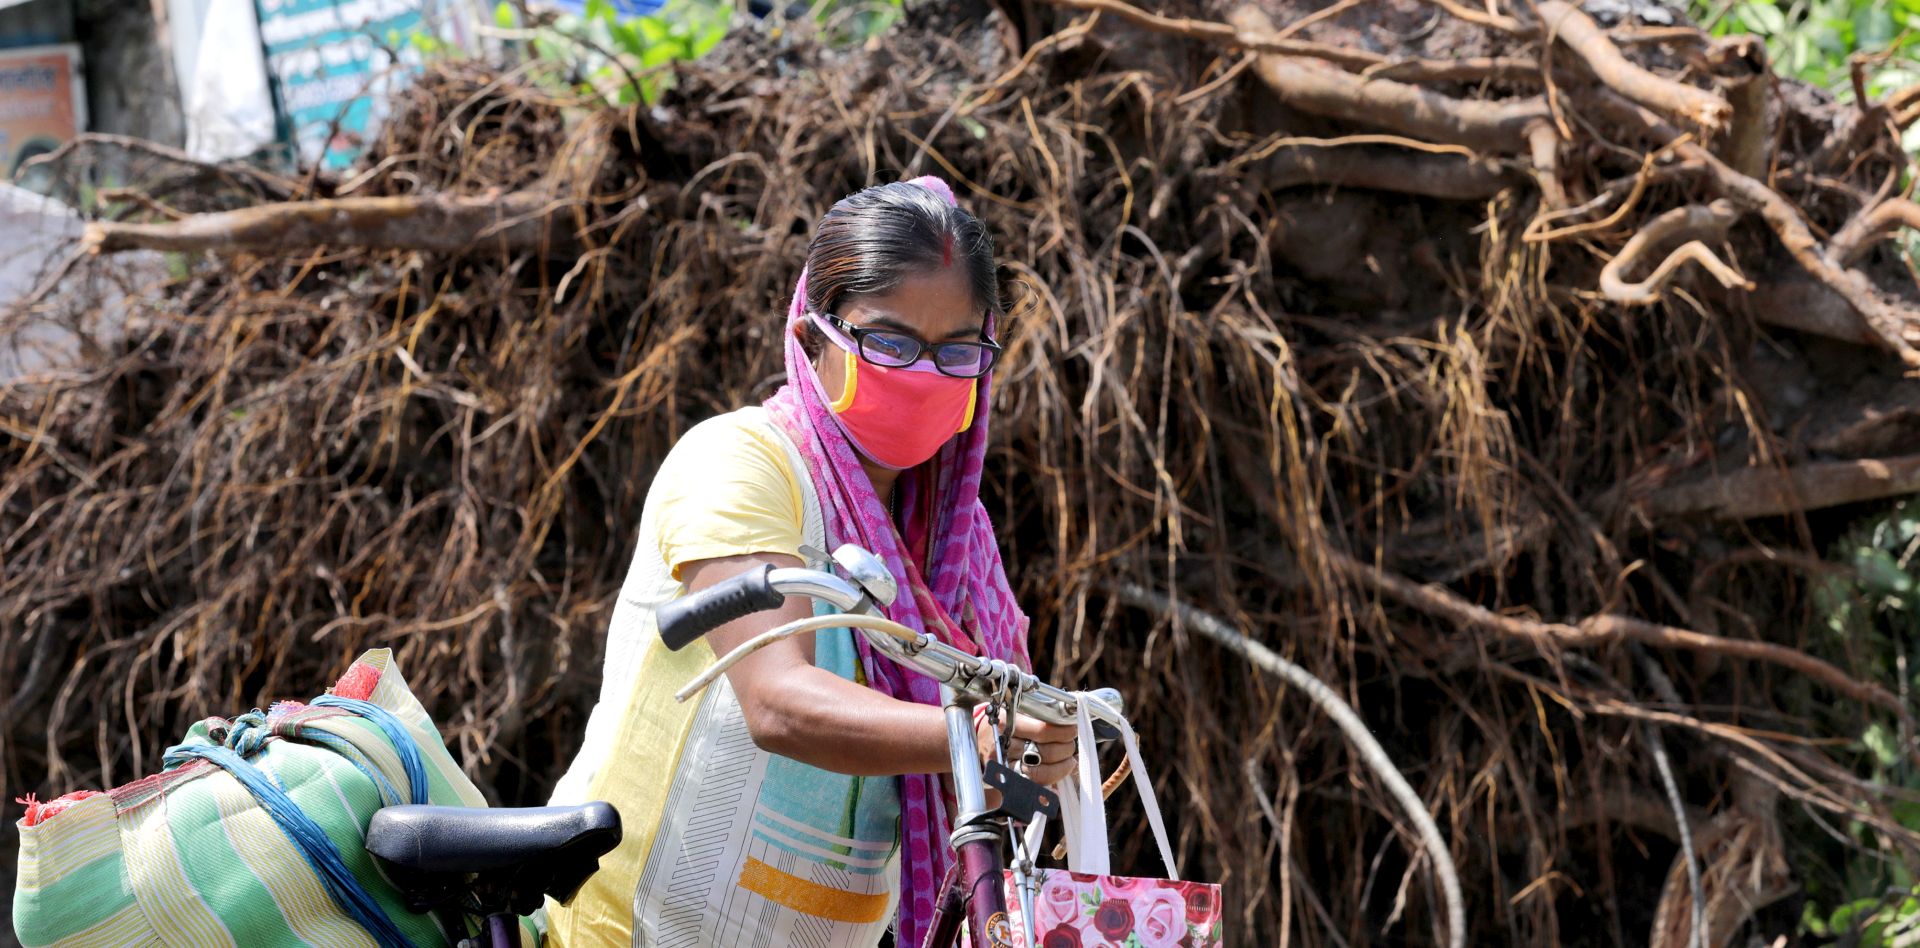 epa08436888 A commuter wears a protective face mask as she passes an uprooted tree after Cyclone Amphan hit Bengal; in Kolkata, India, 22 May 2020.  A massive water crisis faces the city due to disrupted electricity supply lines. According to media reports, 80 people died in Bengal after cyclone Amphan hit the Bengal.  EPA/PIYAL ADHIKARY